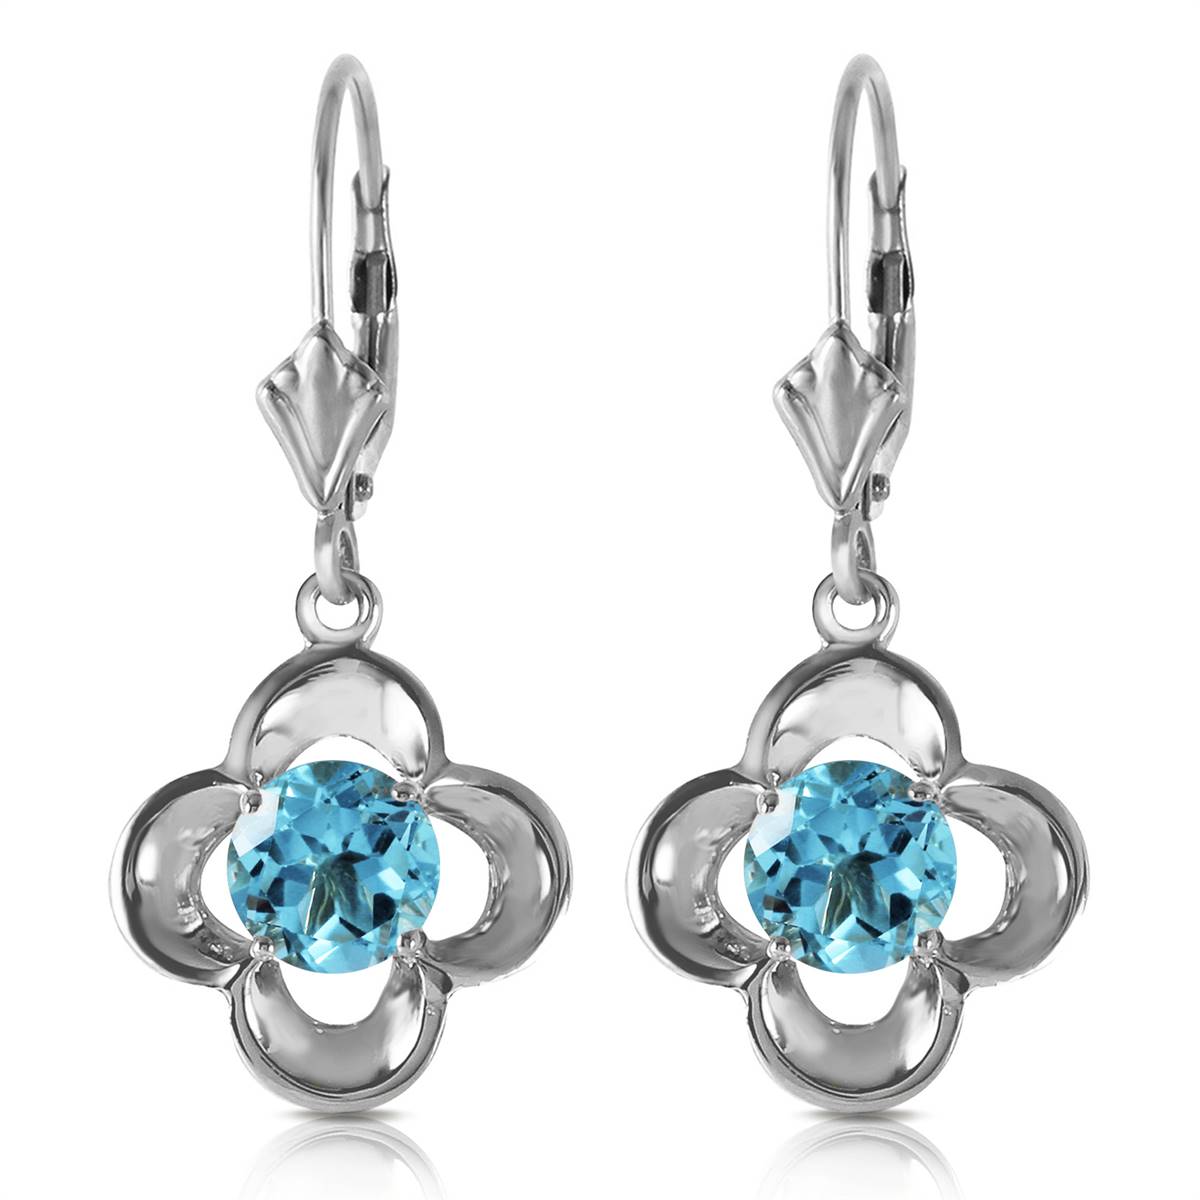 1.1 Carat 14K Solid White Gold Incentive Blue Topaz Earrings